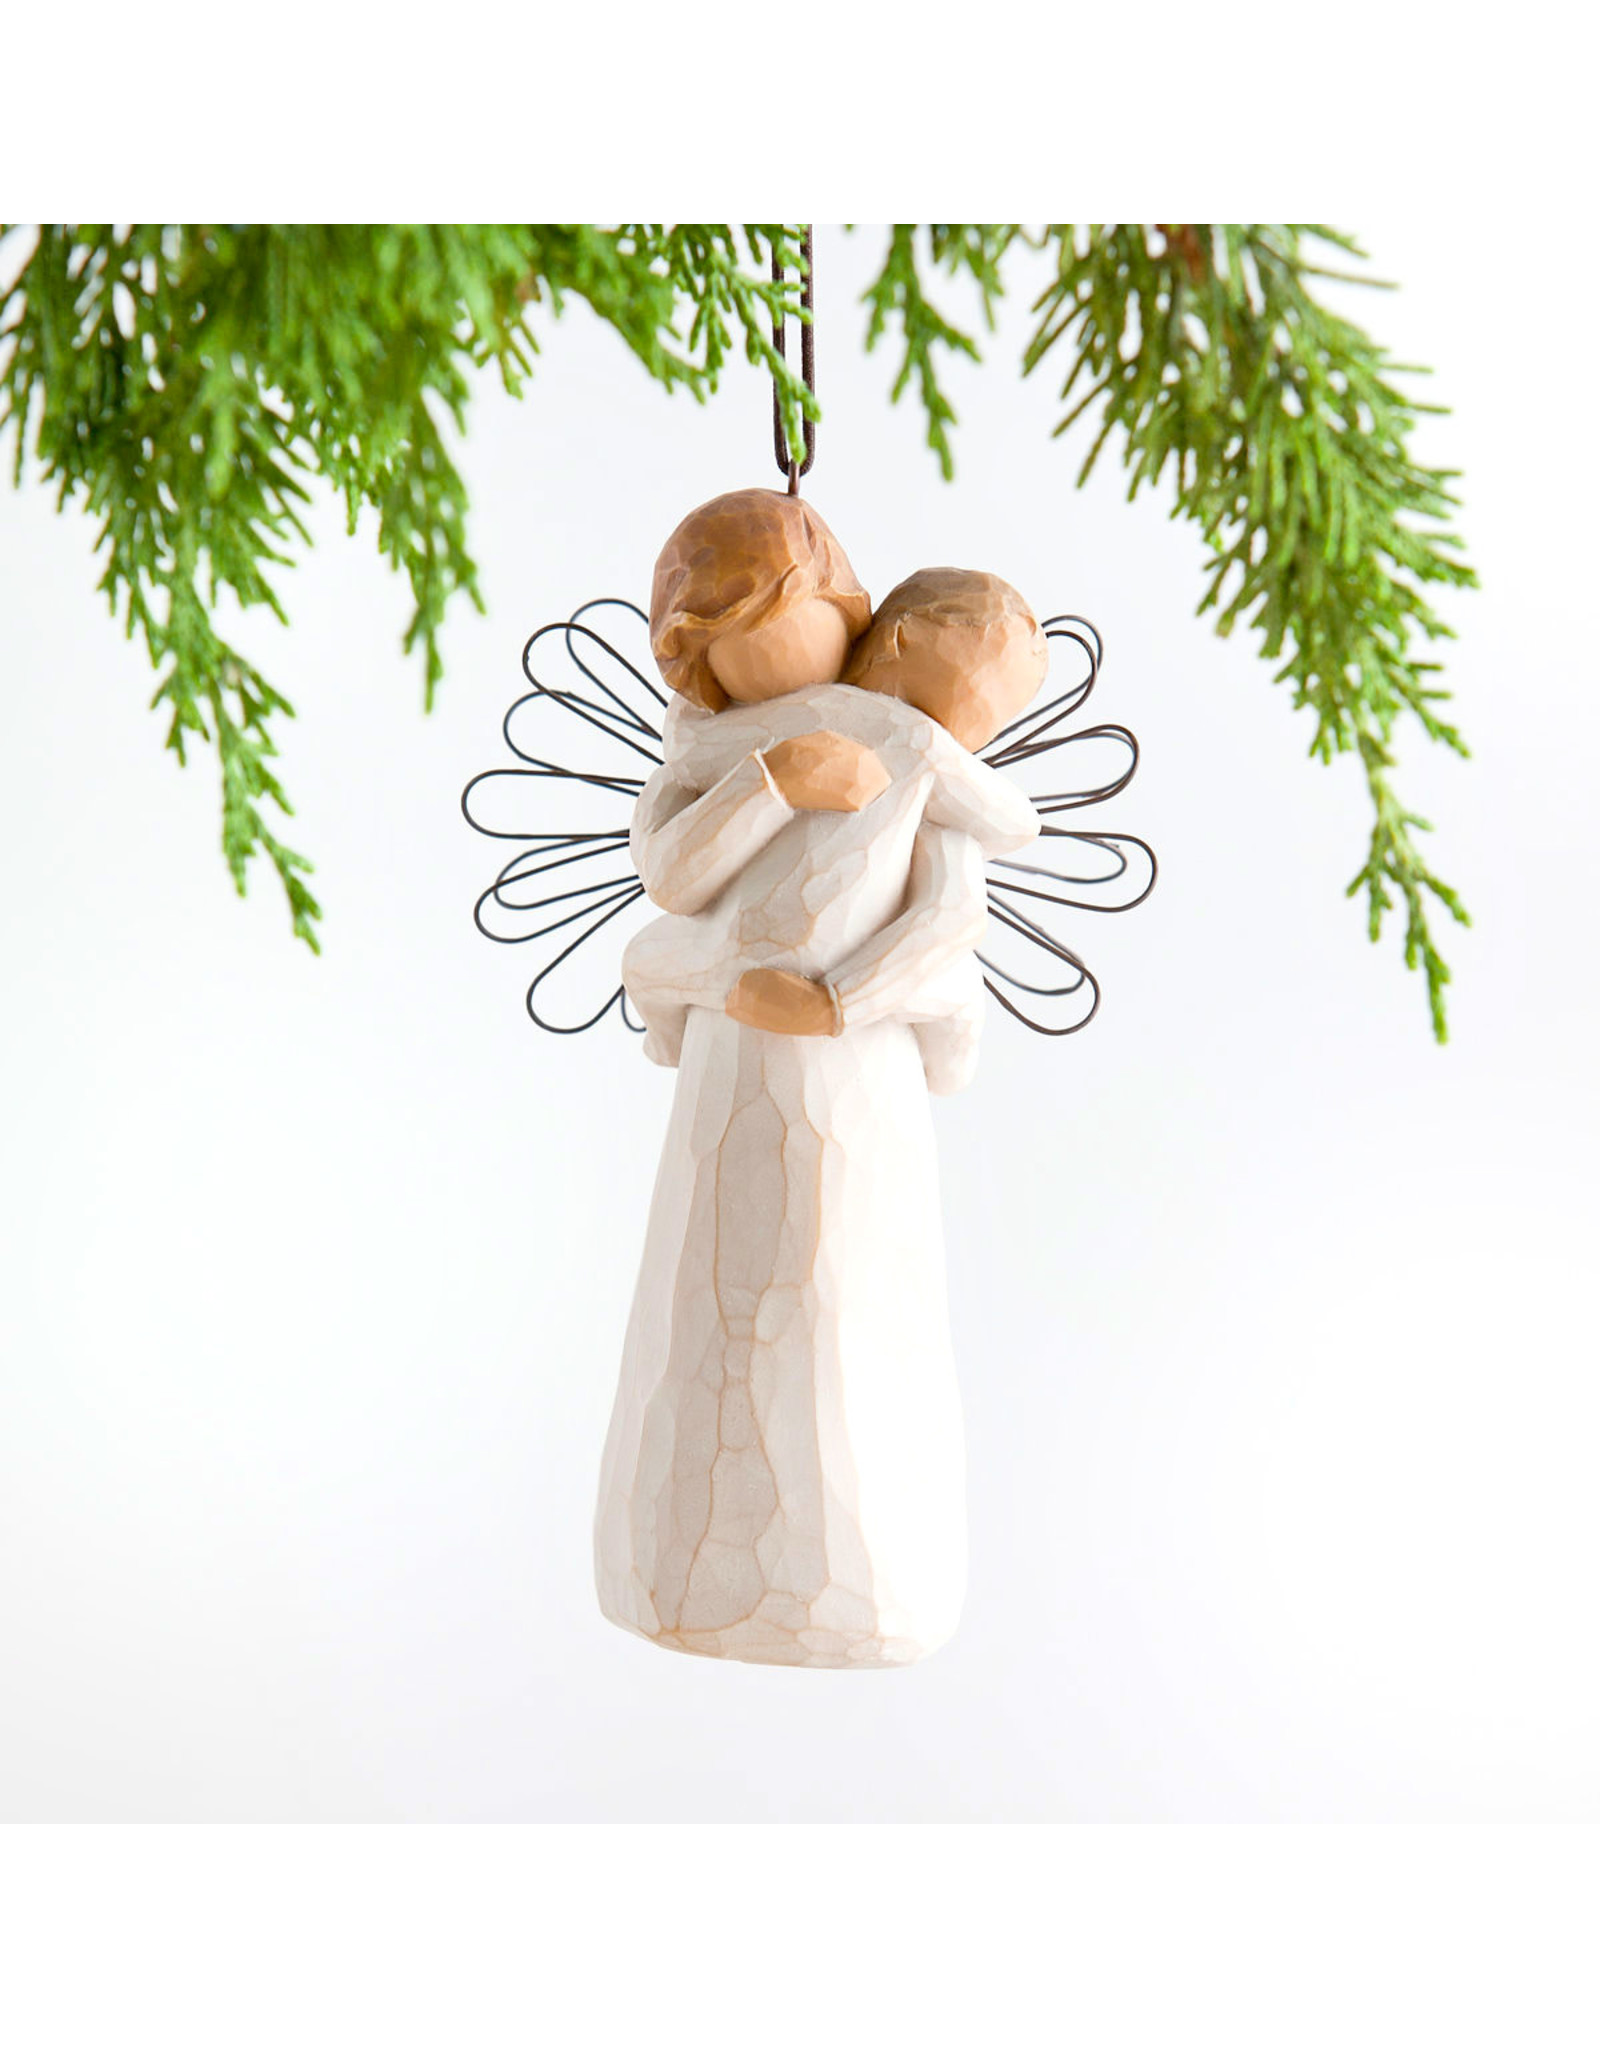 Willow Tree Ornament "Angel's Embrace"